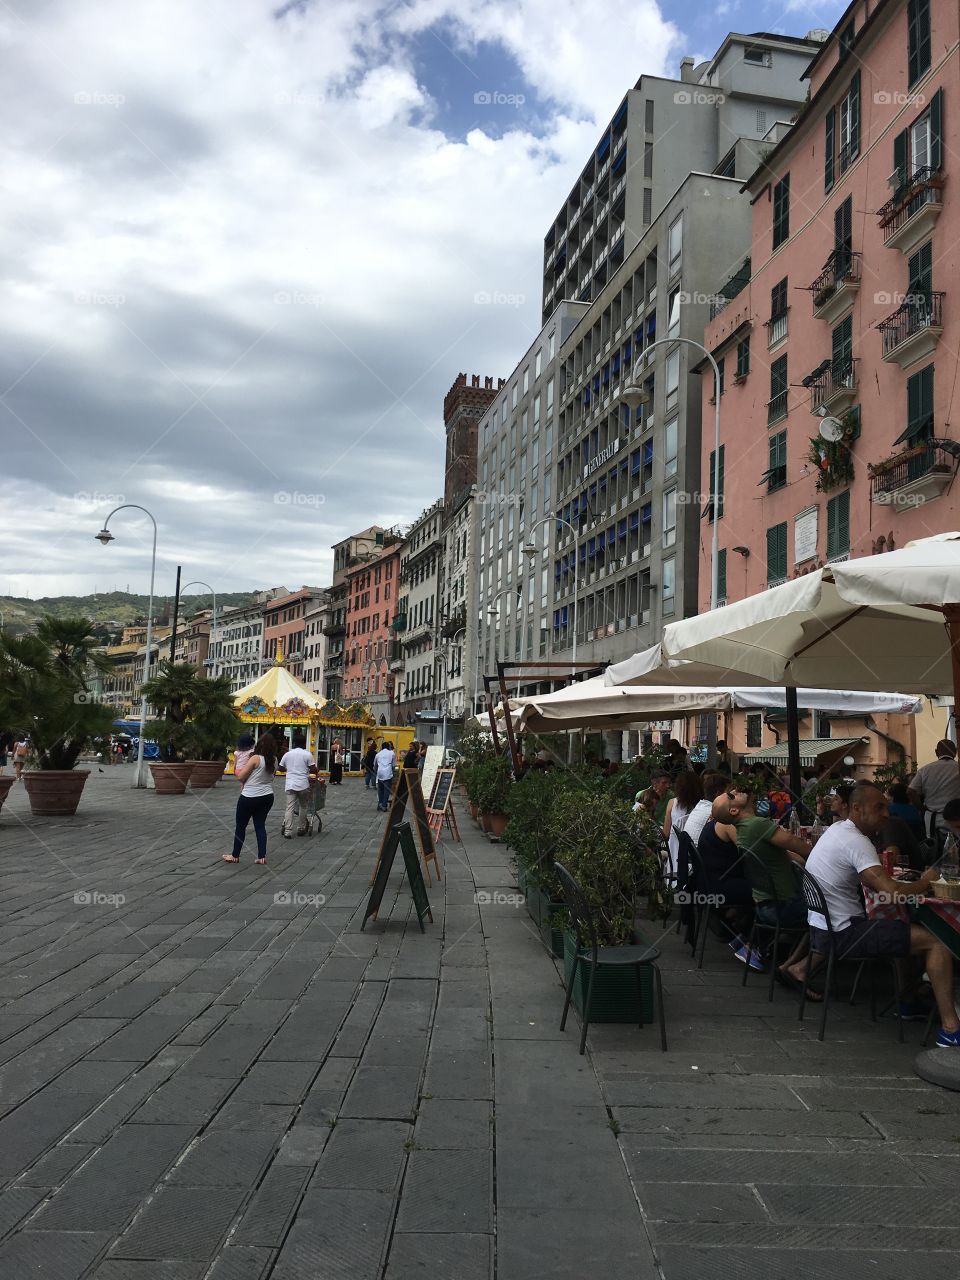 Piazzas are always full of life during Italian summers